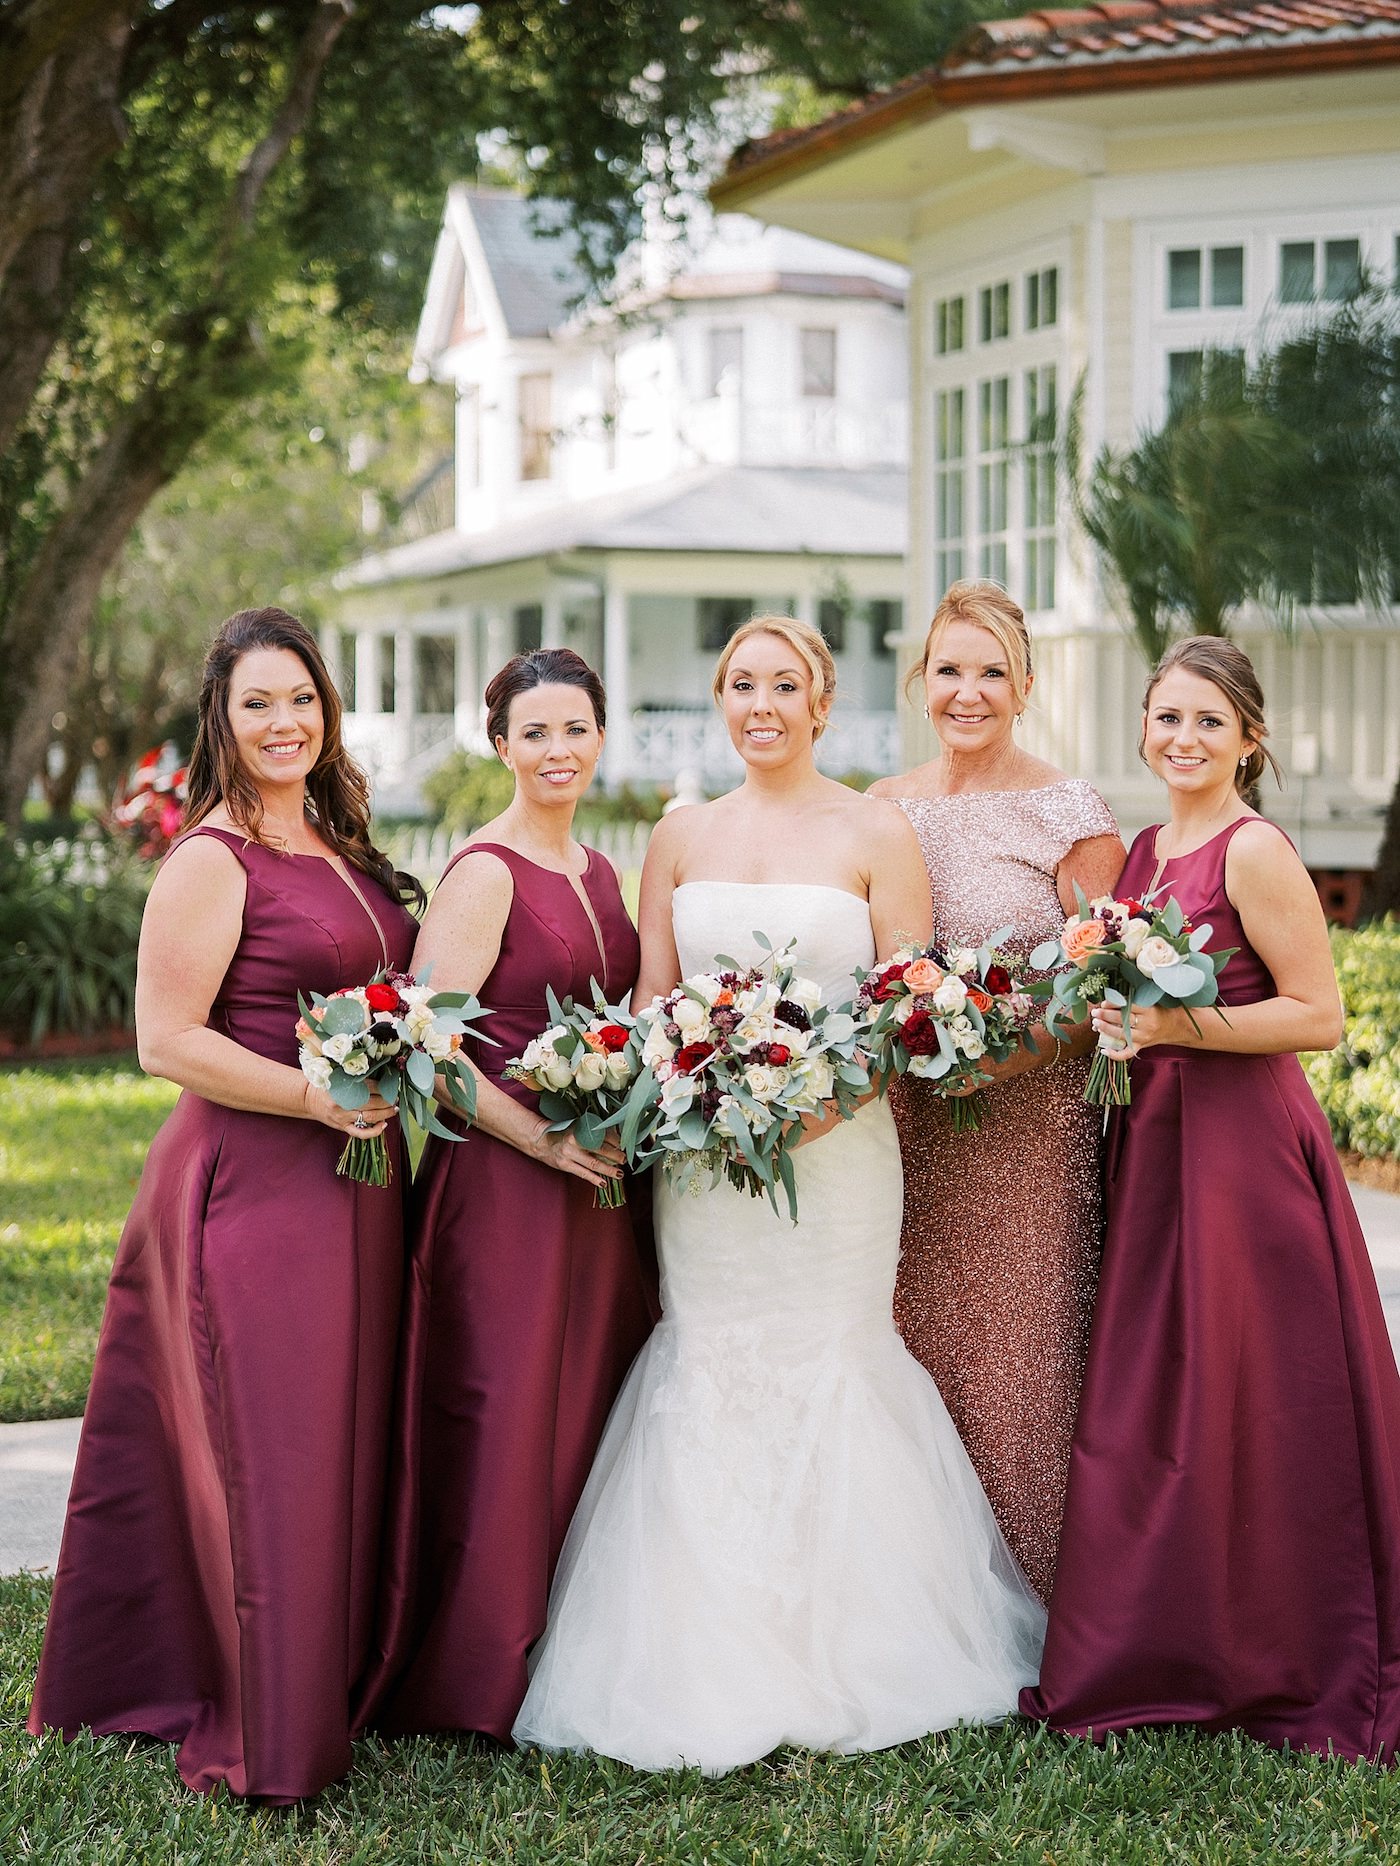 Strapless Ivory Tulle Rouched Mermaid Vera Wang Bridal Gown with Rhinestone Beaded Sash Waistband | Burgundy Wine Bordeaux Red and White Bouquets with Eucalyptus Greenery by Tampa Wedding Florist Brides N Blooms | Florida Fall Autumn Wedding Party Portrait with Deep Red Long Formal Bridesmaid Dresses and Gold Sequin Mother of the Bride Gown